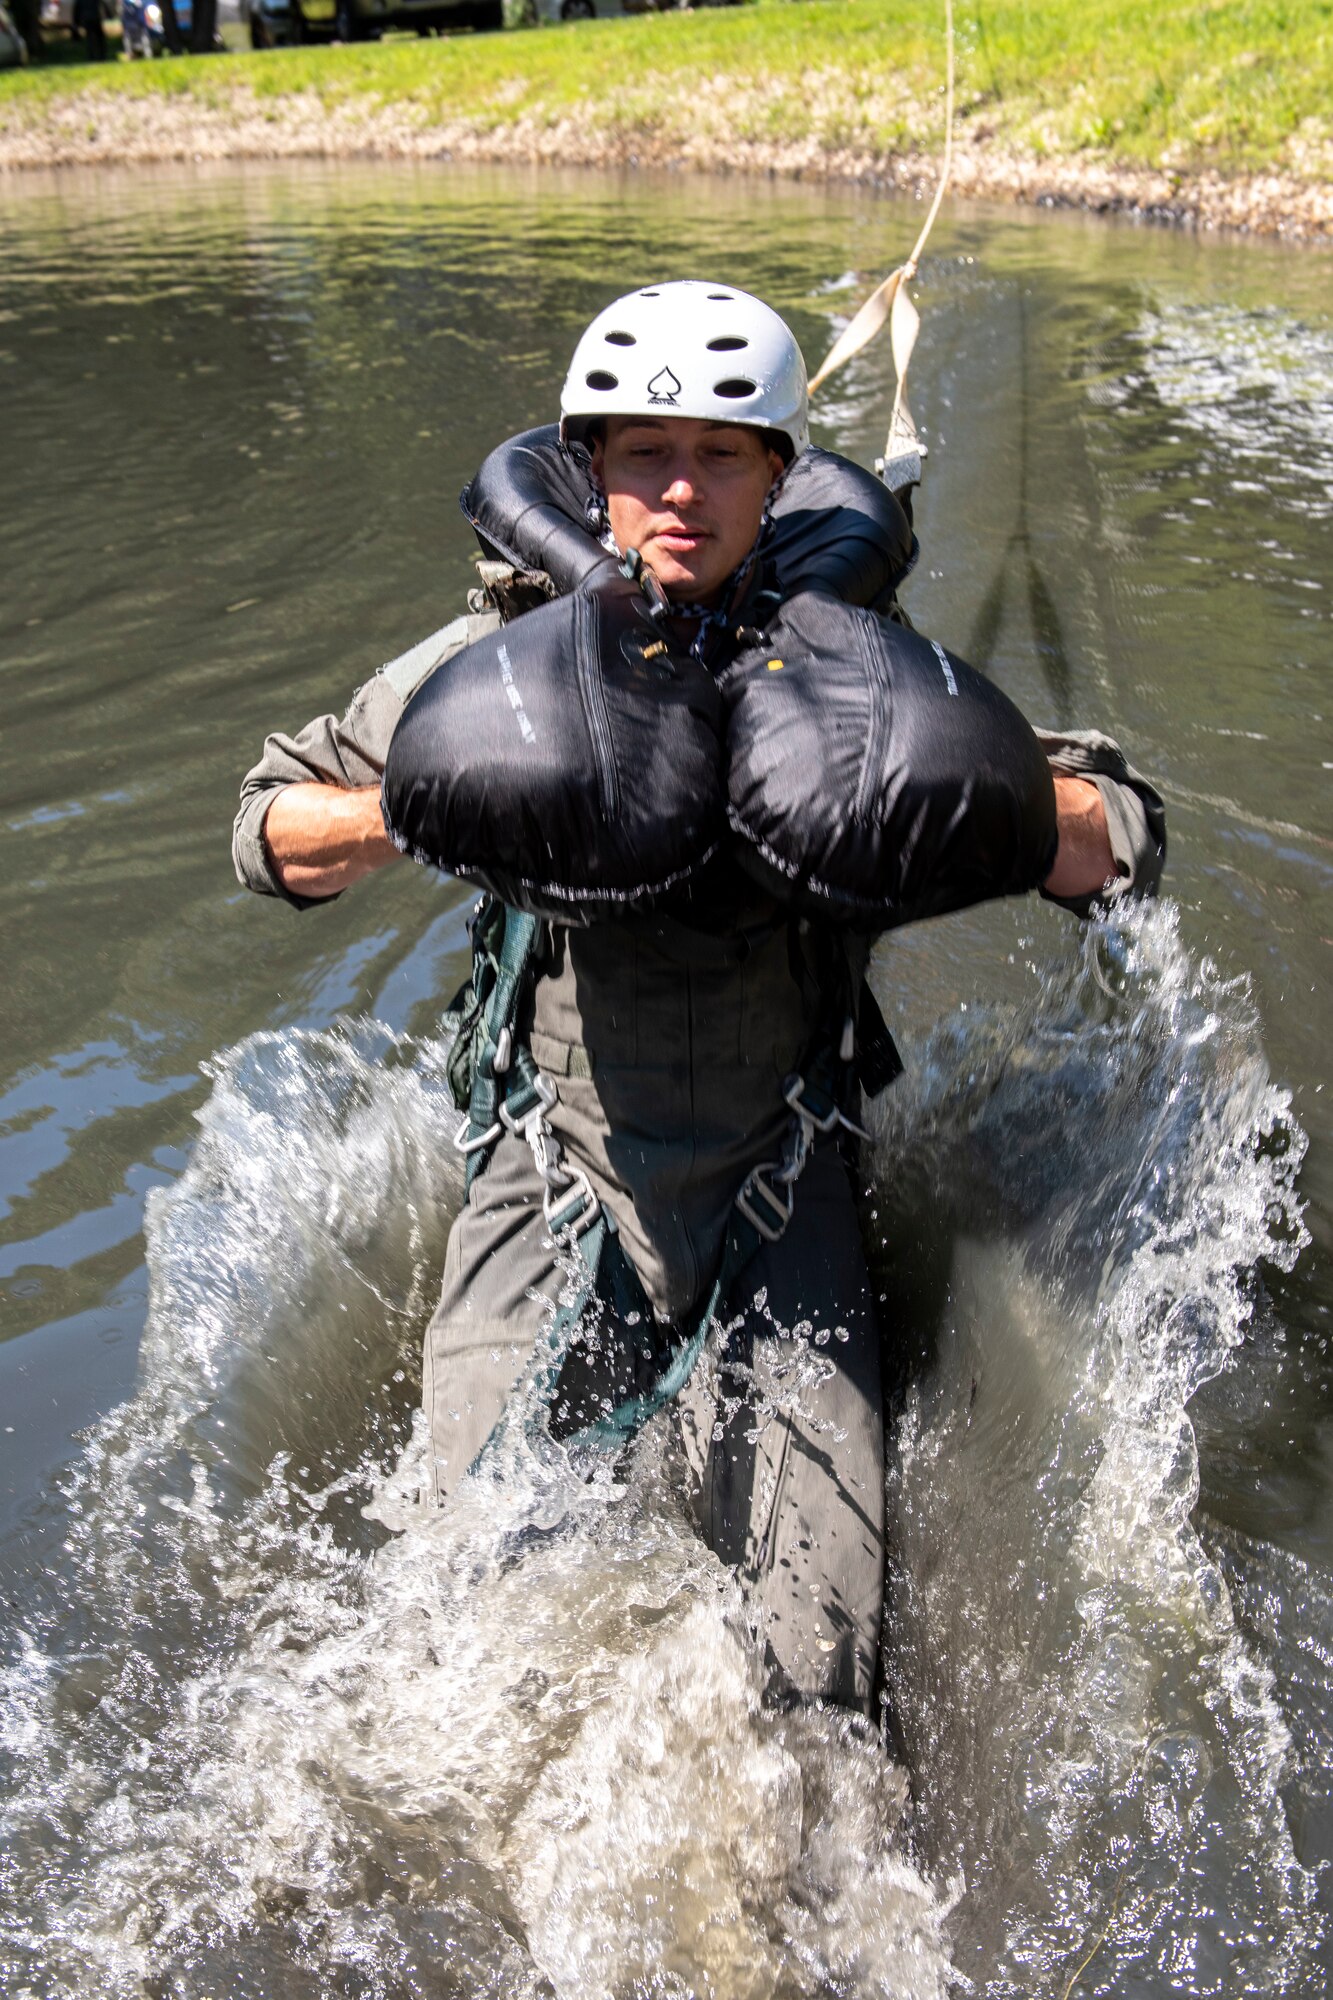 U.S. Air Force Capt. Jared Schulz, an F-16 fighter pilot assigned to the Ohio National Guard's 180th Fighter Wing, is dragged through the water during water survival training in Waterville, Ohio, Aug. 8, 2020.